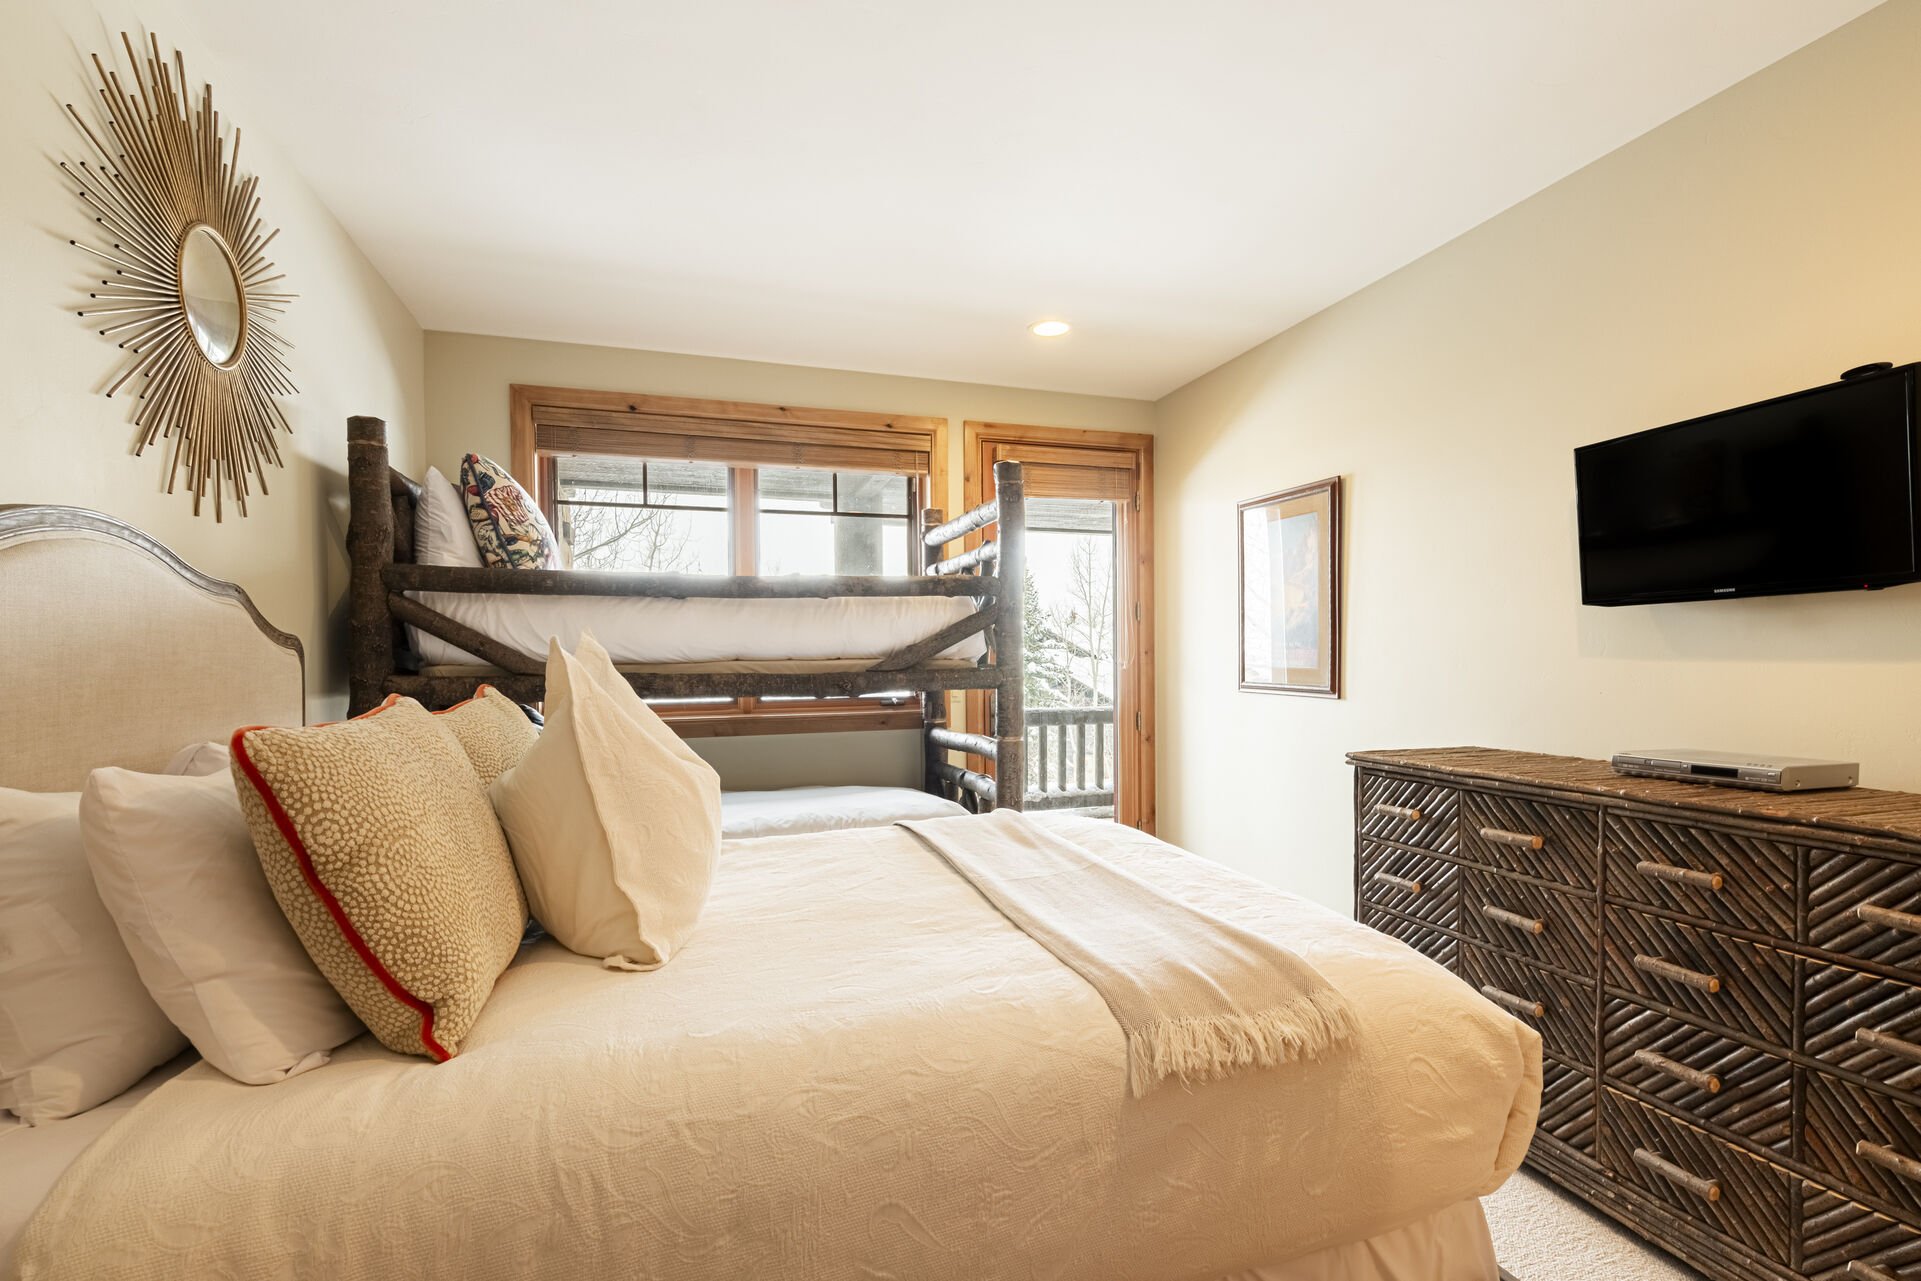 Bedroom 4 offers a queen bed, twin over twin bunk beds , a 32” Samsung TV, and deck access